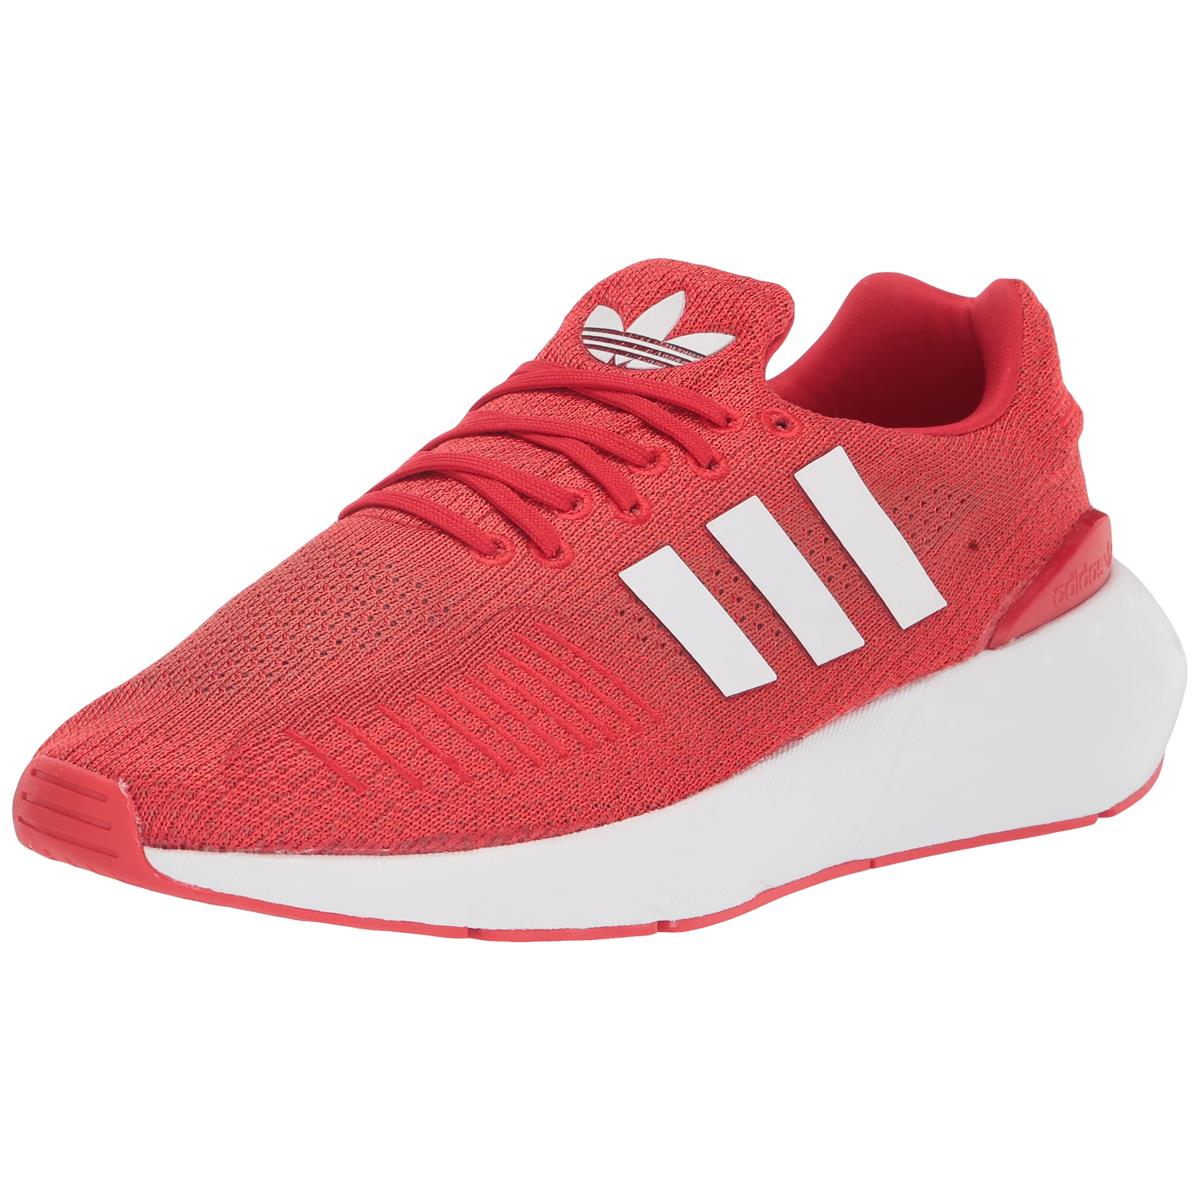 Adidas Swift Run 22 Shoes Men`s Vivid Red/White/Altered Amber